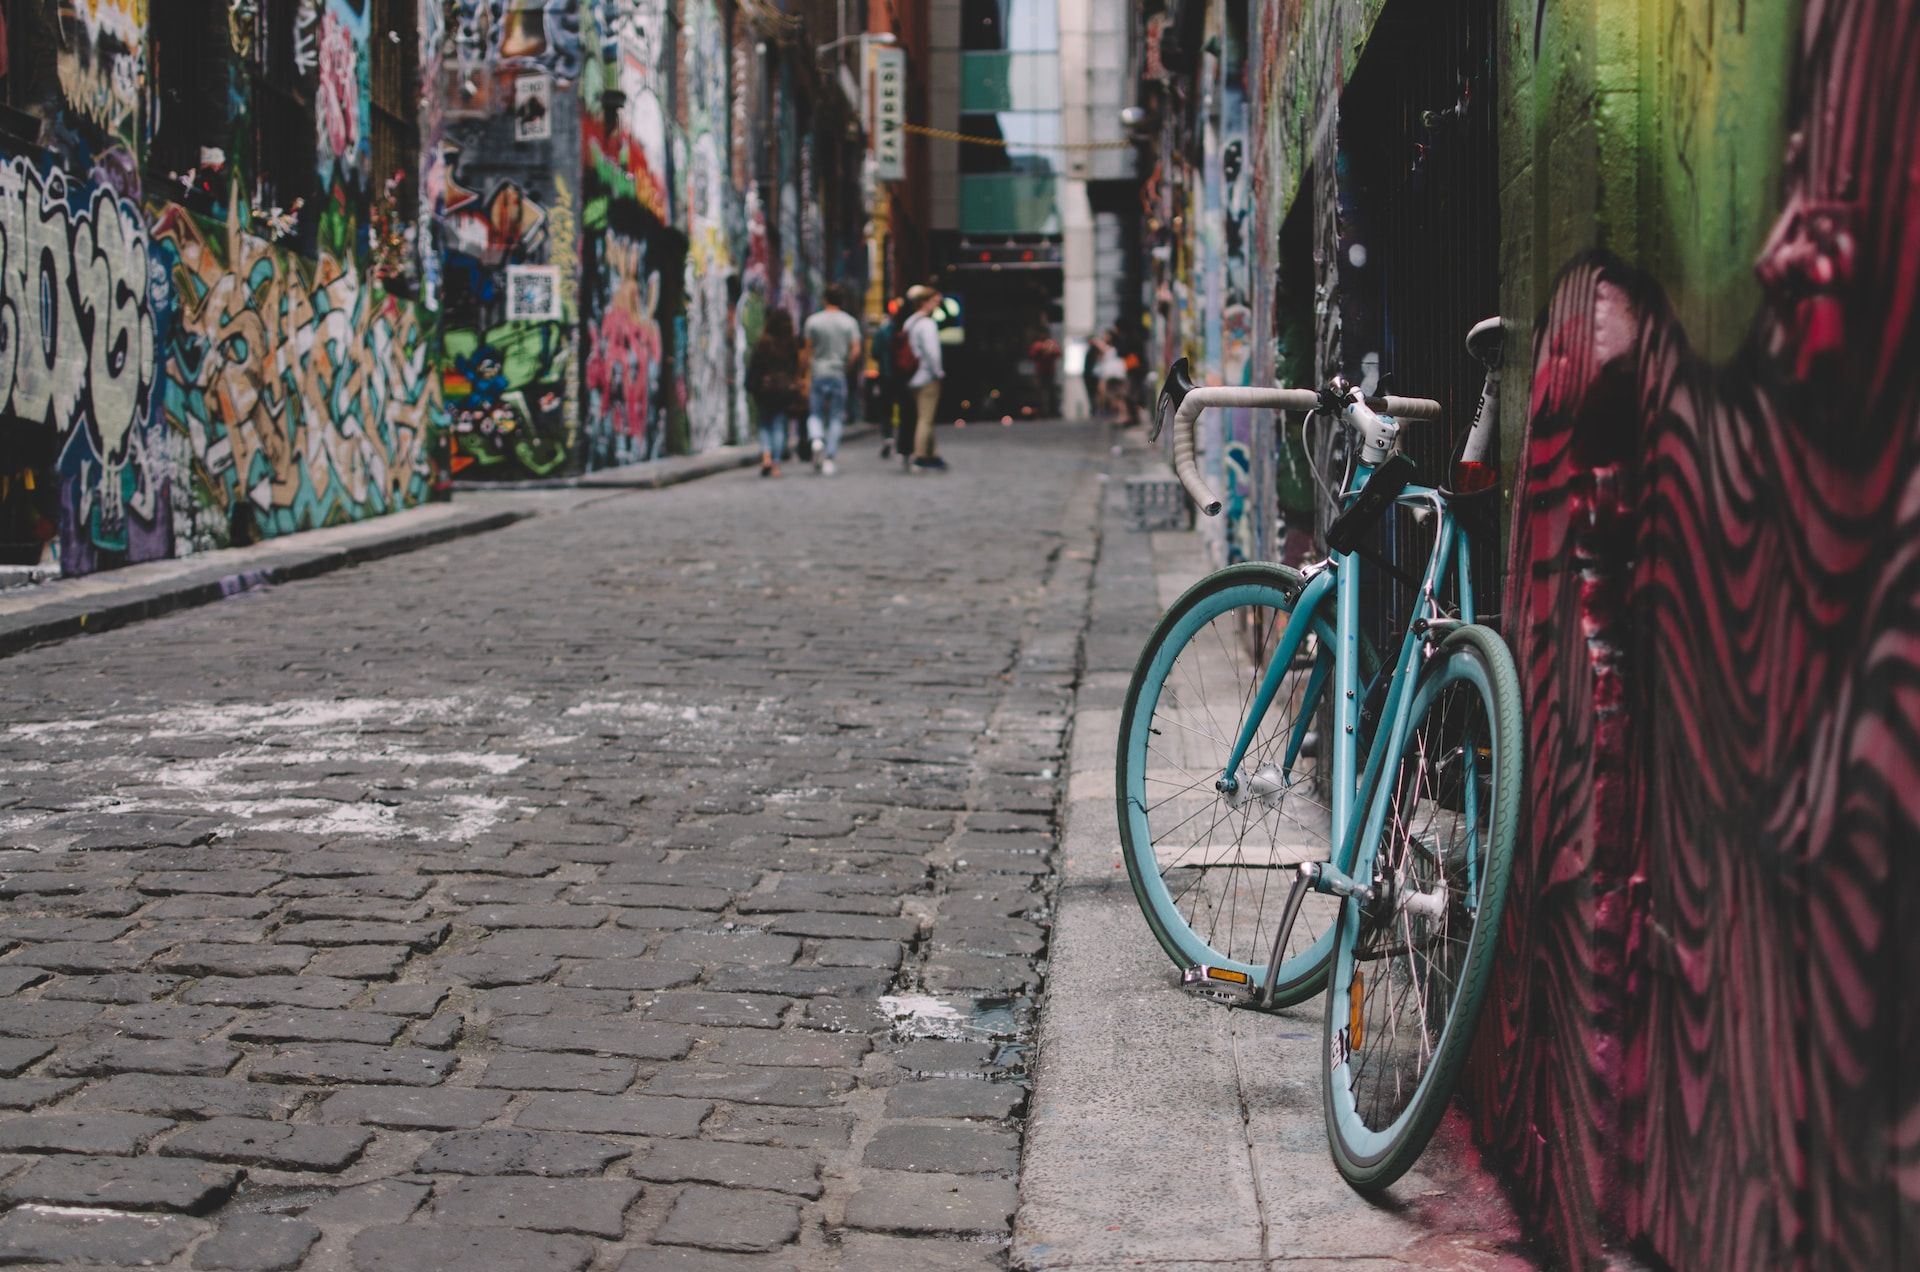 A bike leaning against a graffitied wall